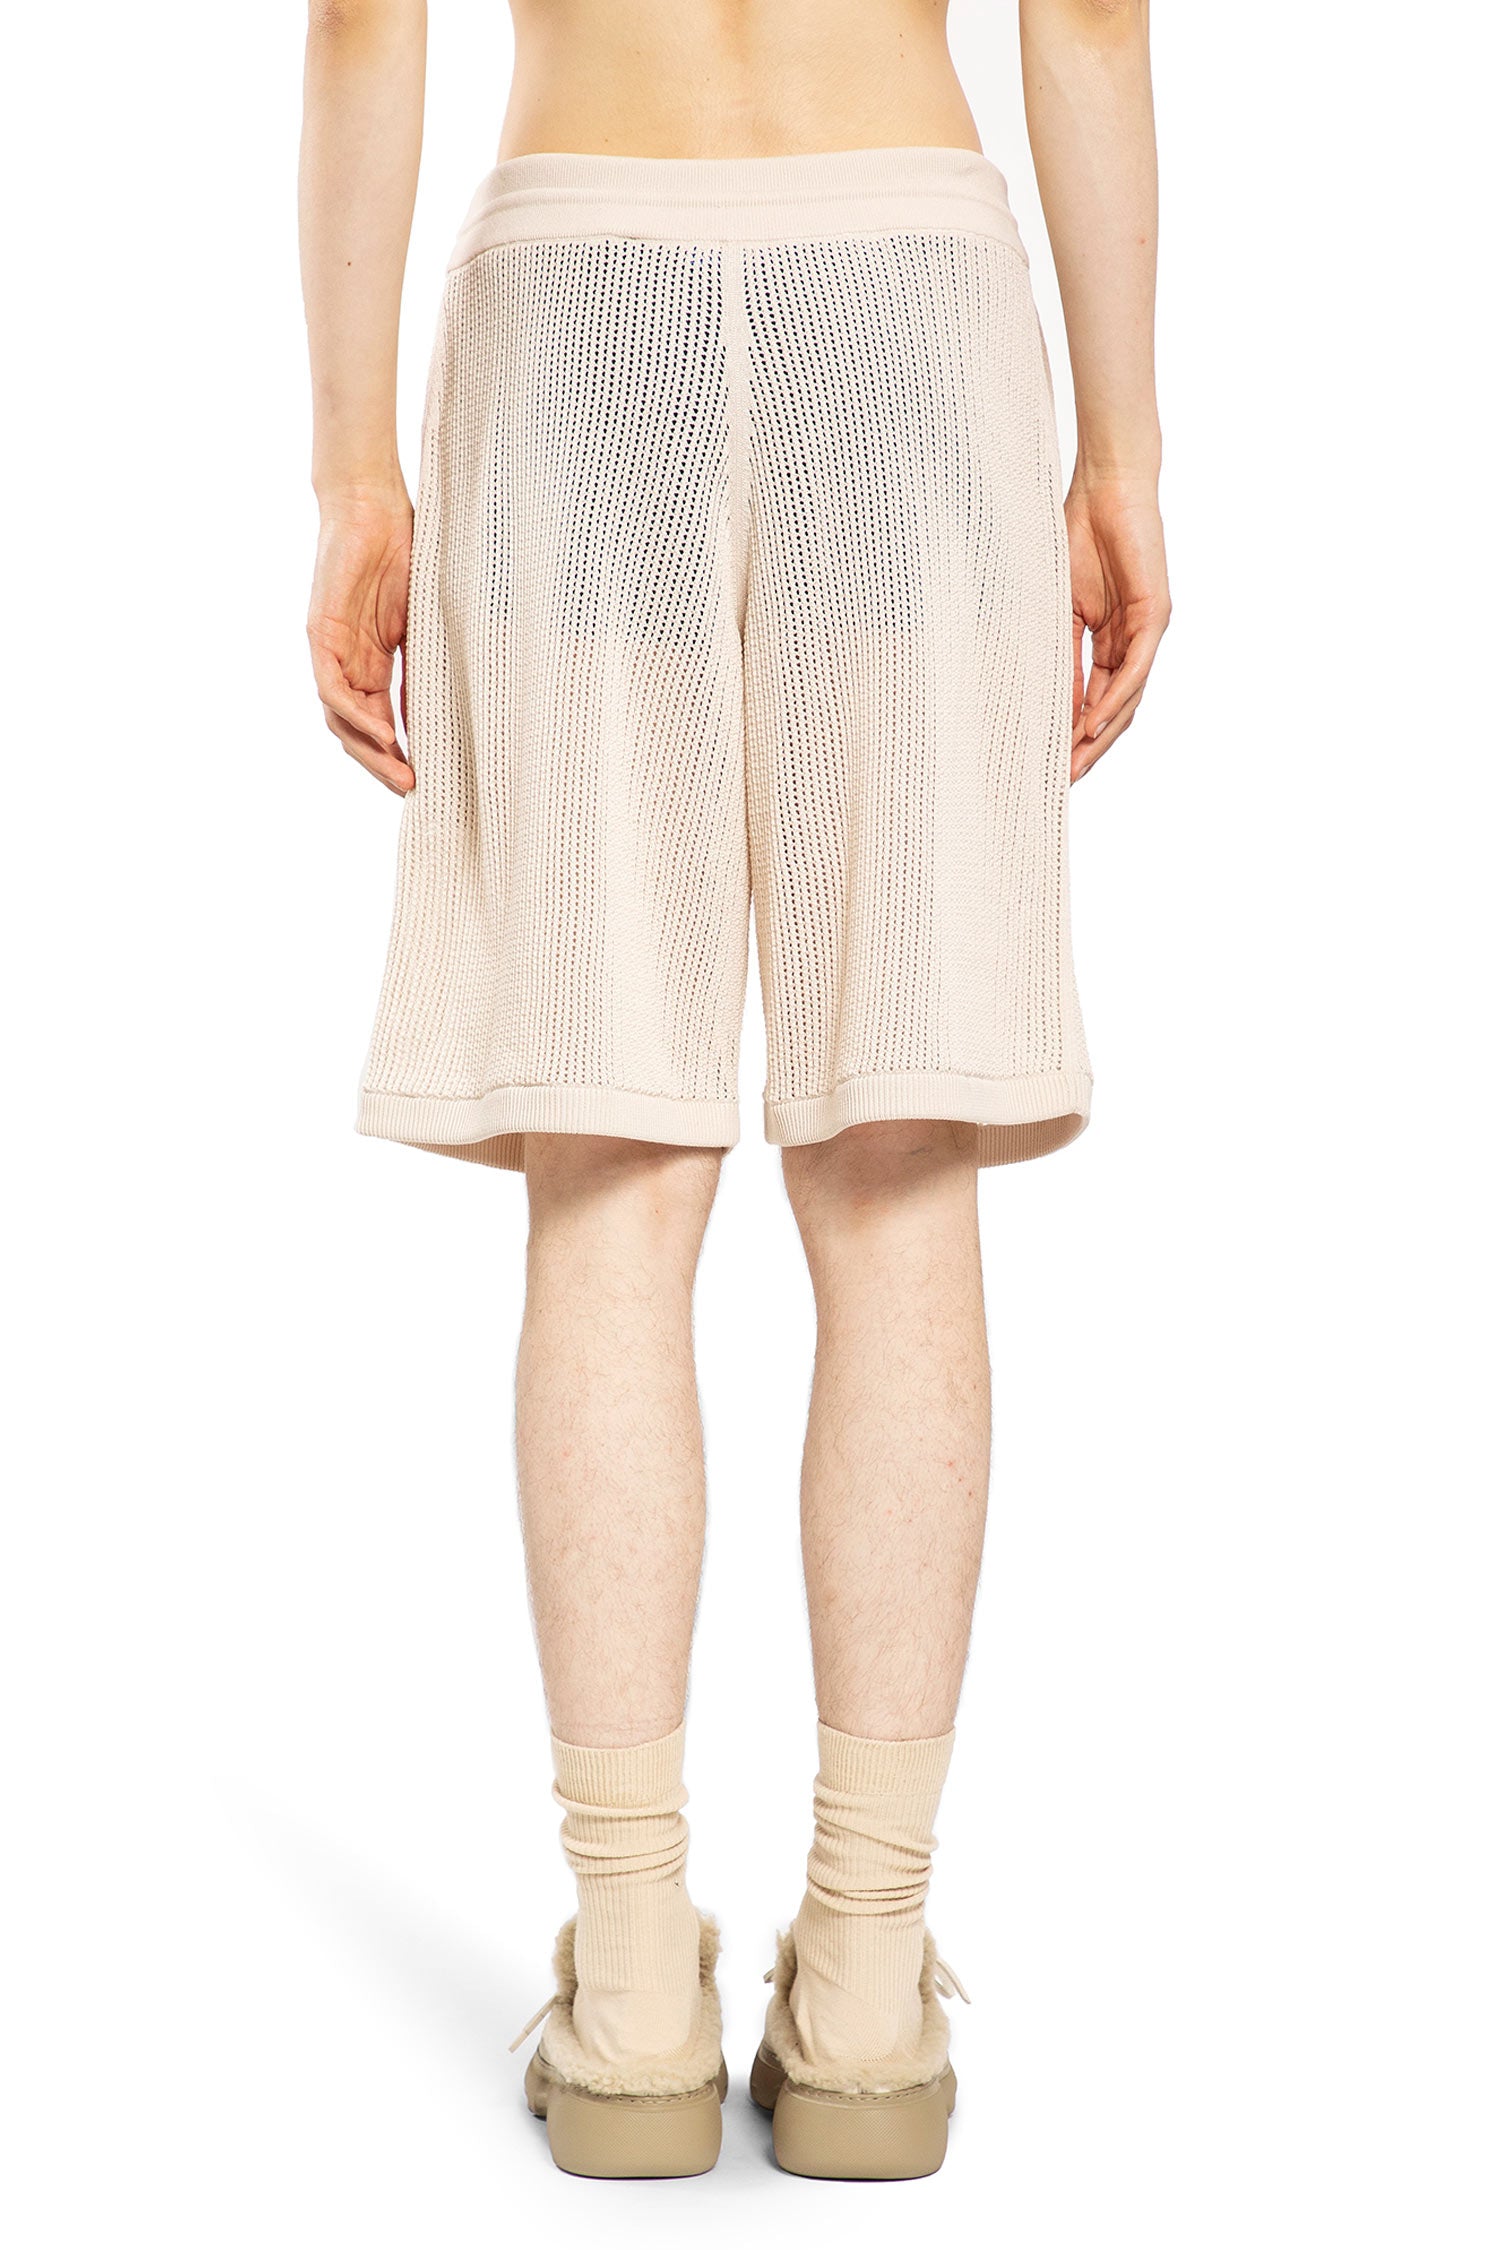 BURBERRY MAN OFF-WHITE SHORTS & SKIRTS